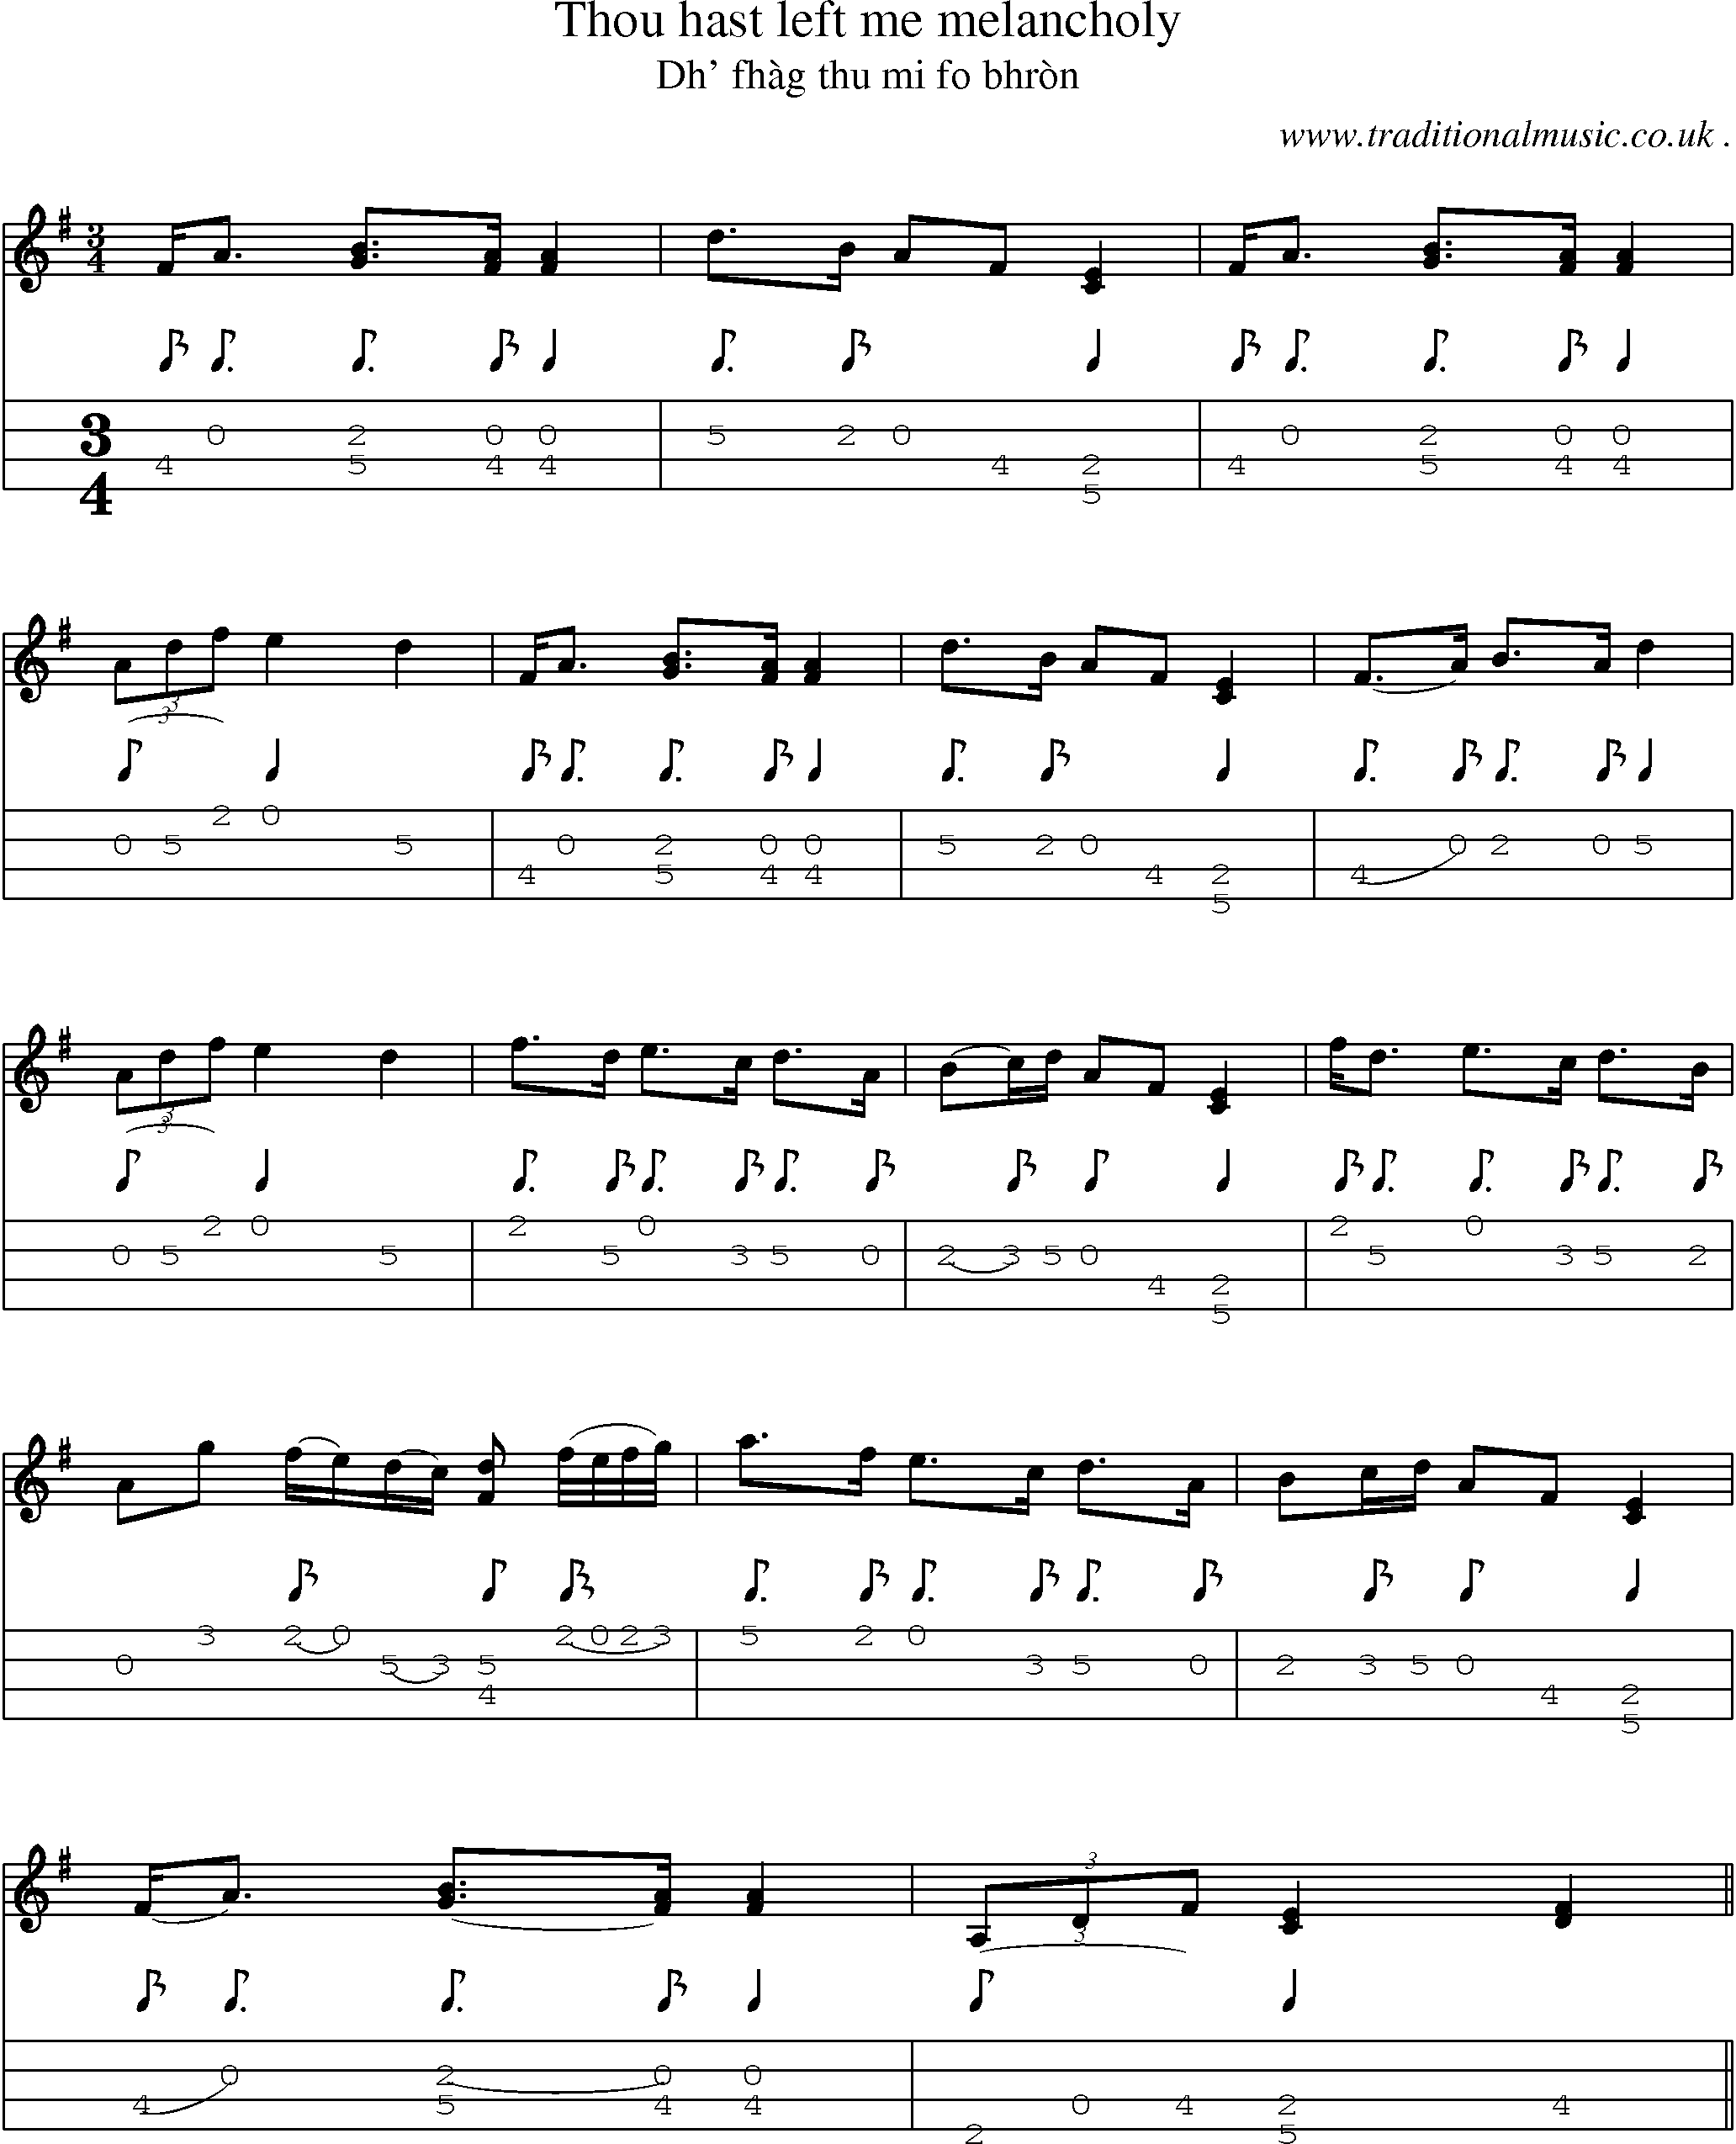 Sheet-music  score, Chords and Mandolin Tabs for Thou Hast Left Me Melancholy